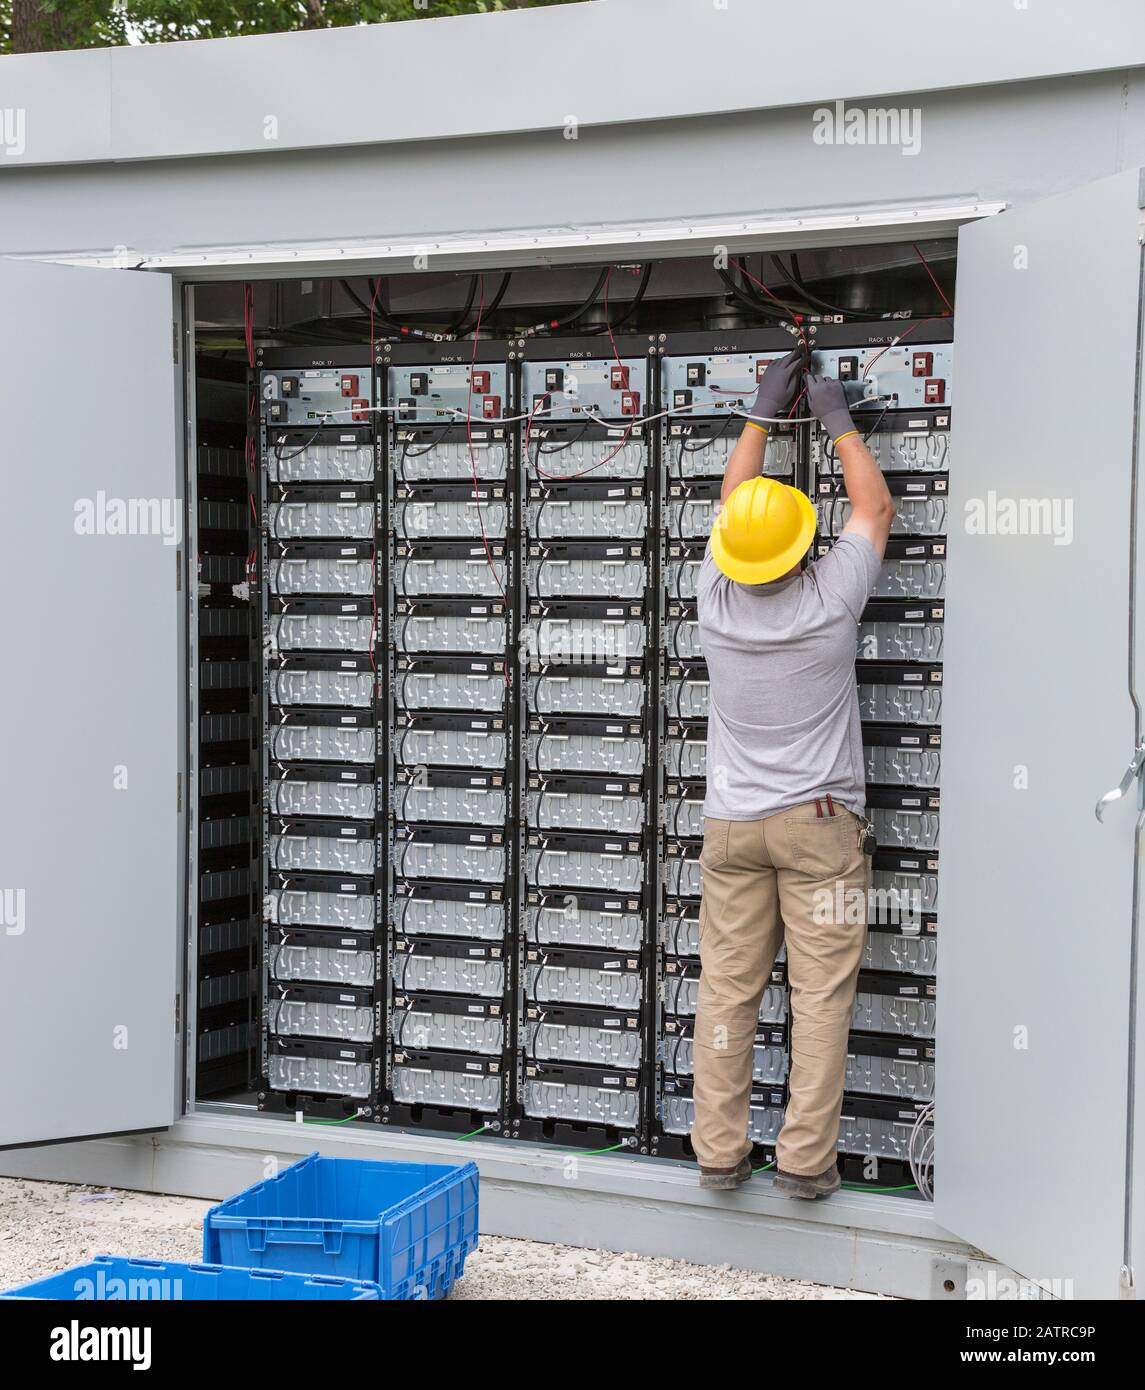 Engineer connecting energy storage batteries for back up power to an electric power plant Stock Photo